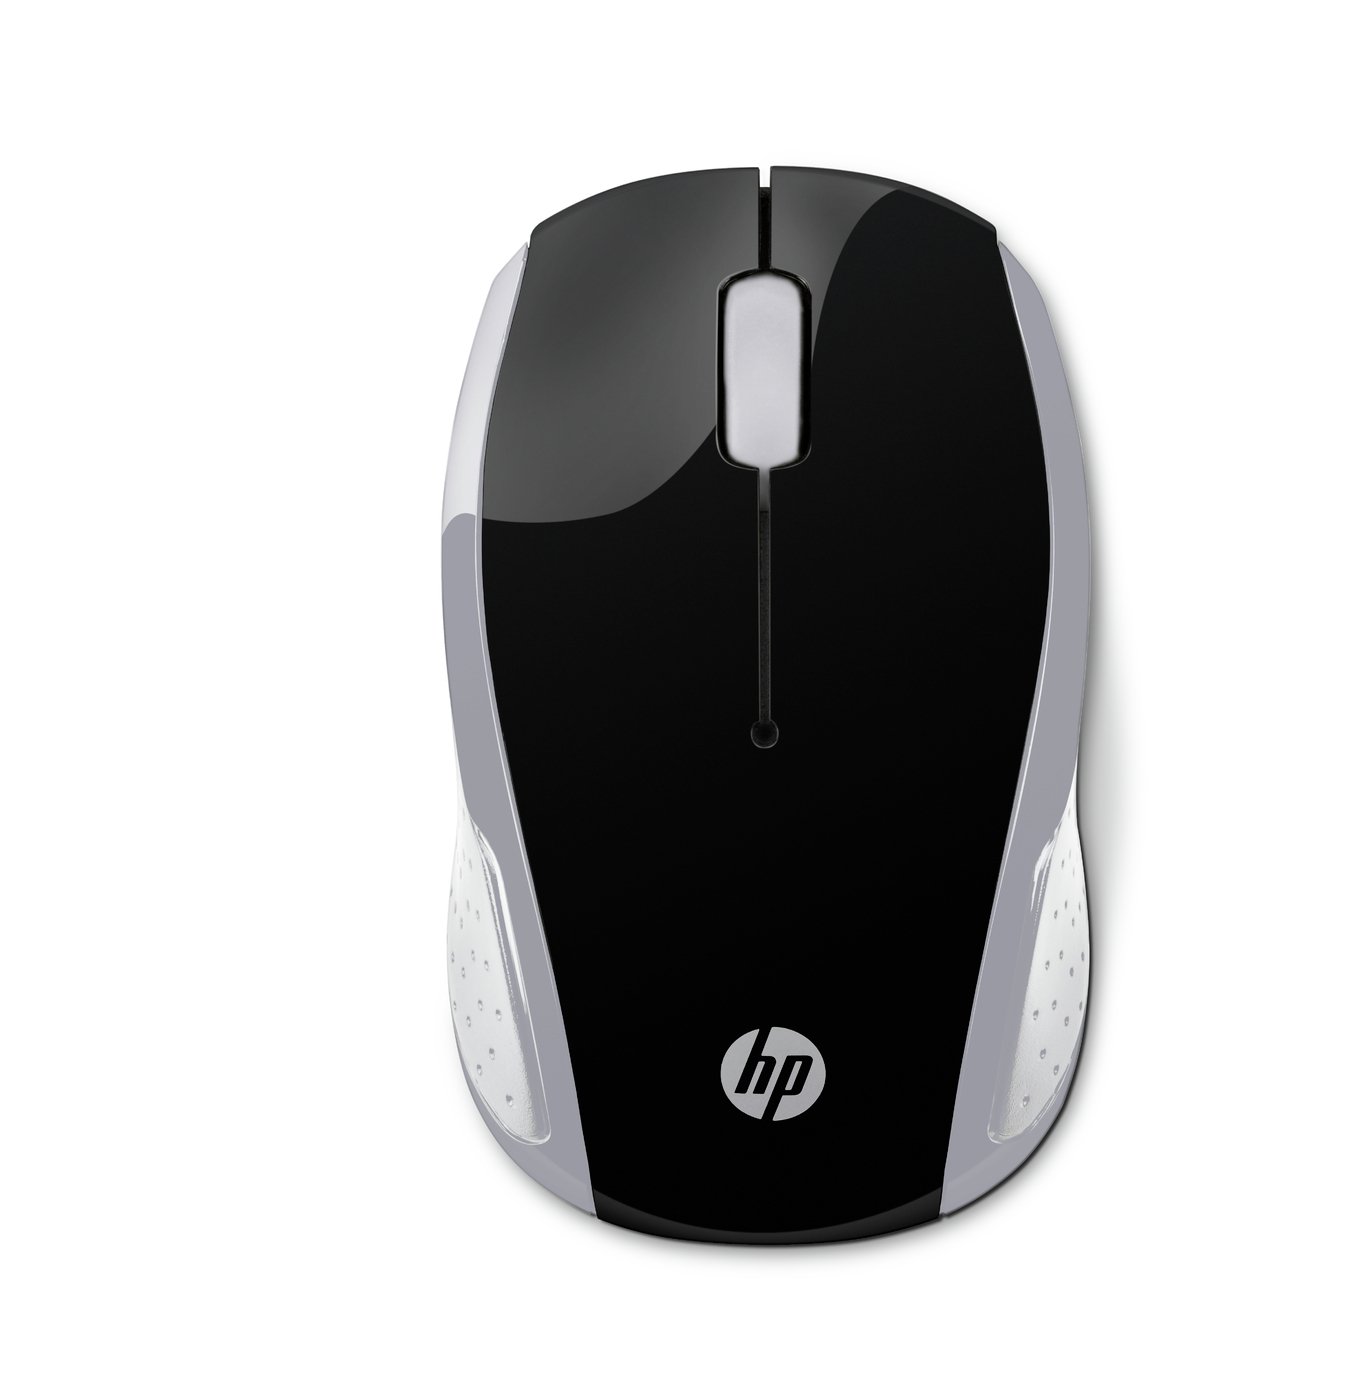 HP 200 Wireless Mouse Review